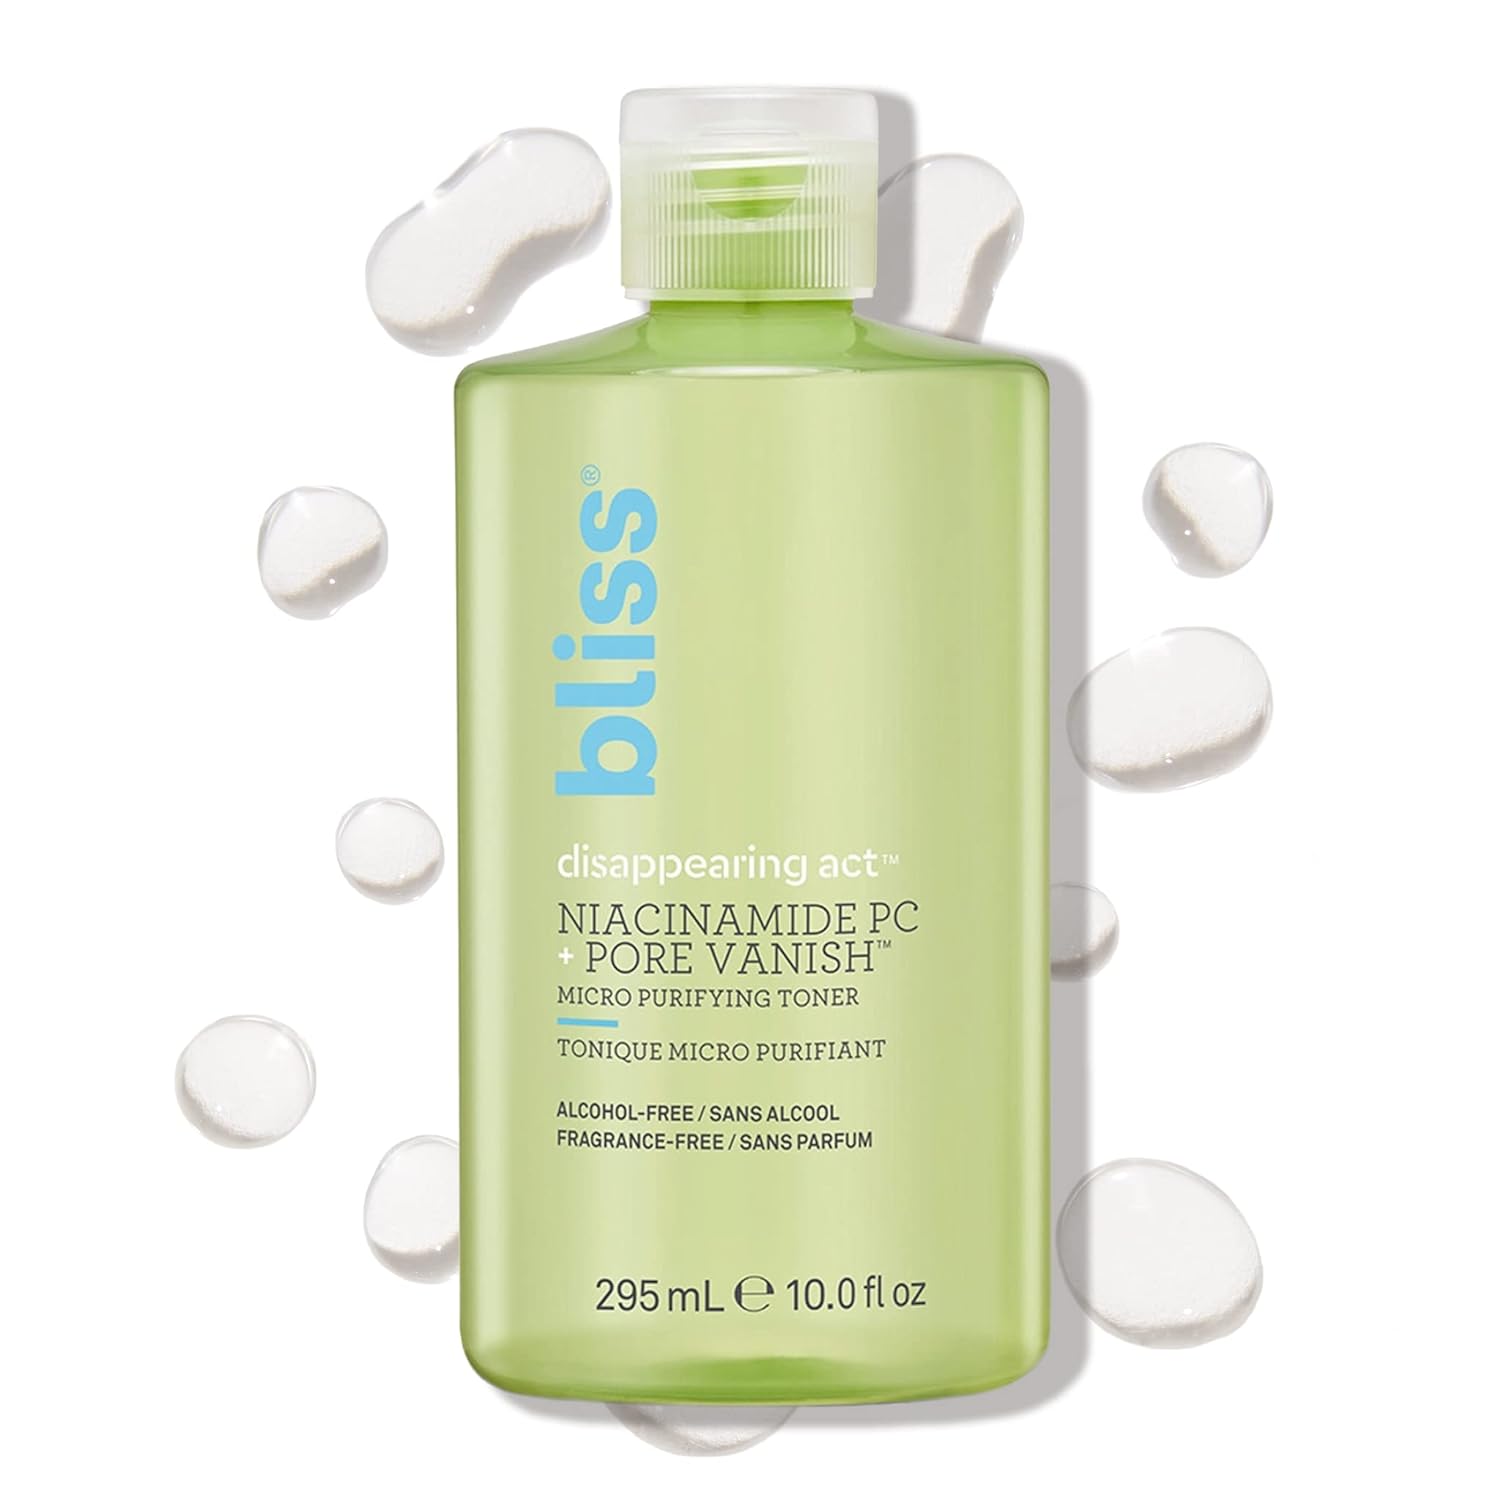 Bliss Disappearing Act Niacinamide Toner - 10 Fl Oz - Pore Vanish™ Complex - Purifies and Minimizes Pores - Alcohol-Free Face Toner - Clean - Vegan & Cruelty Free